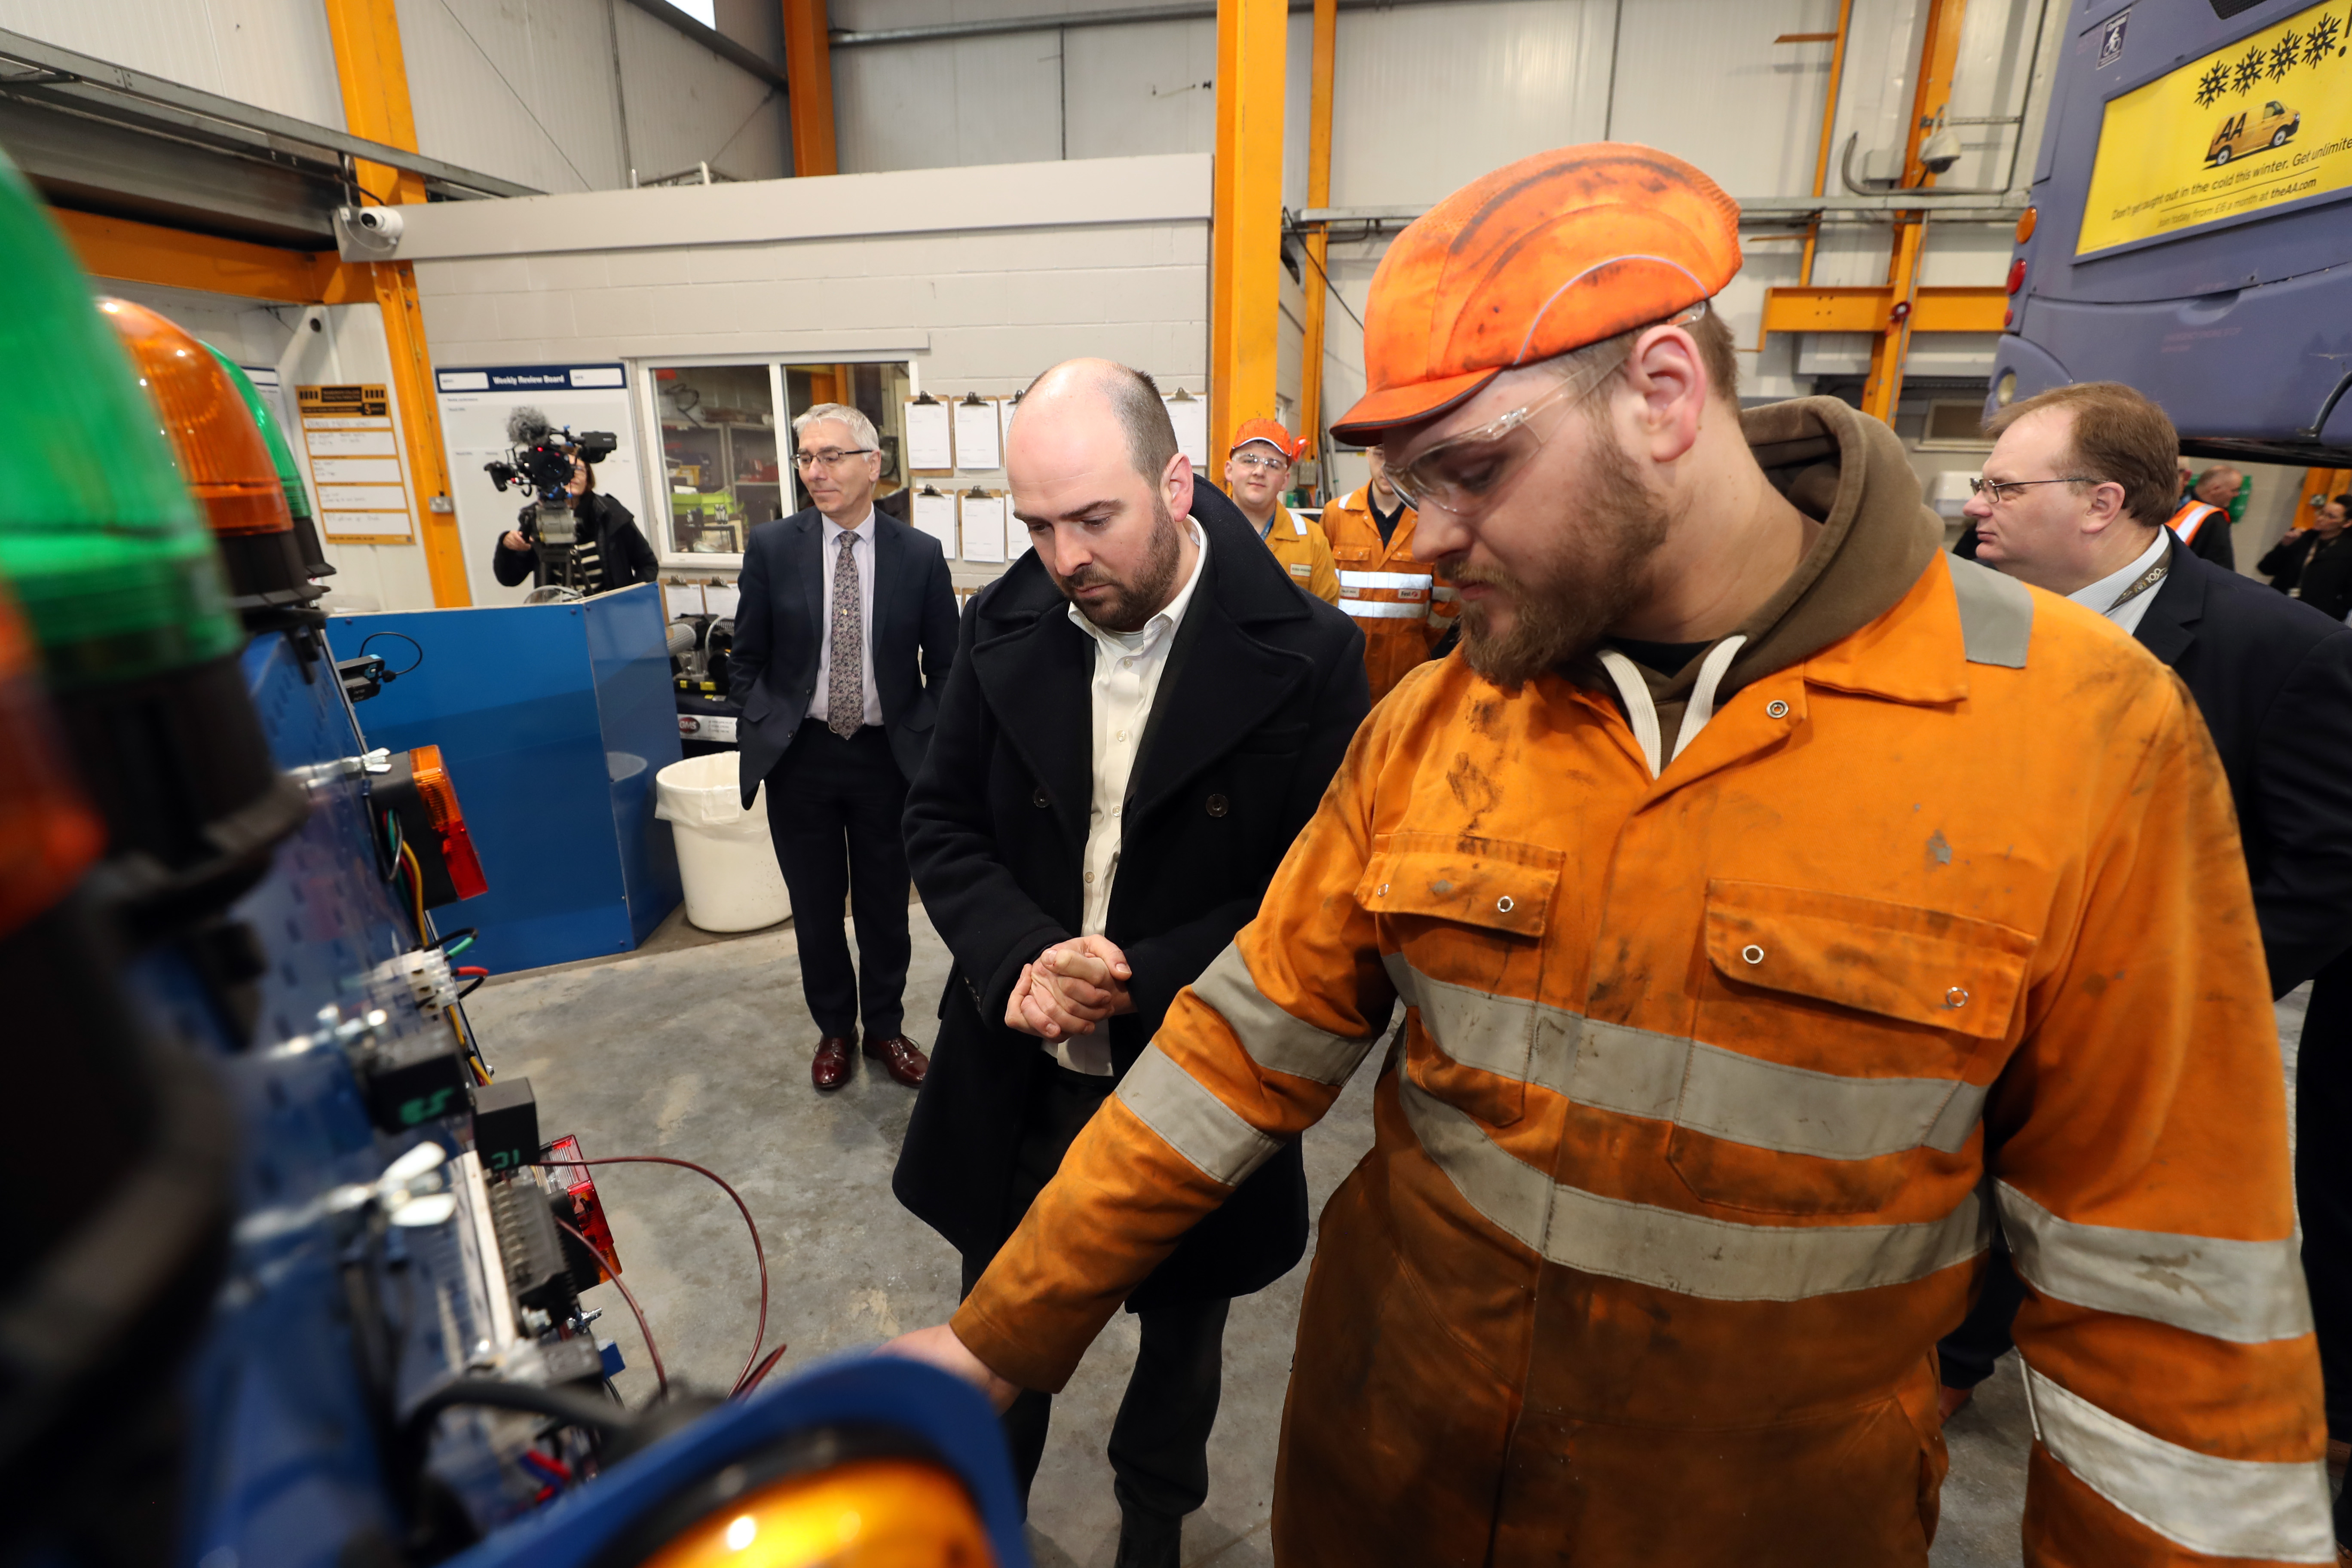 First welcomes Transport Minister’s apprenticeship visit